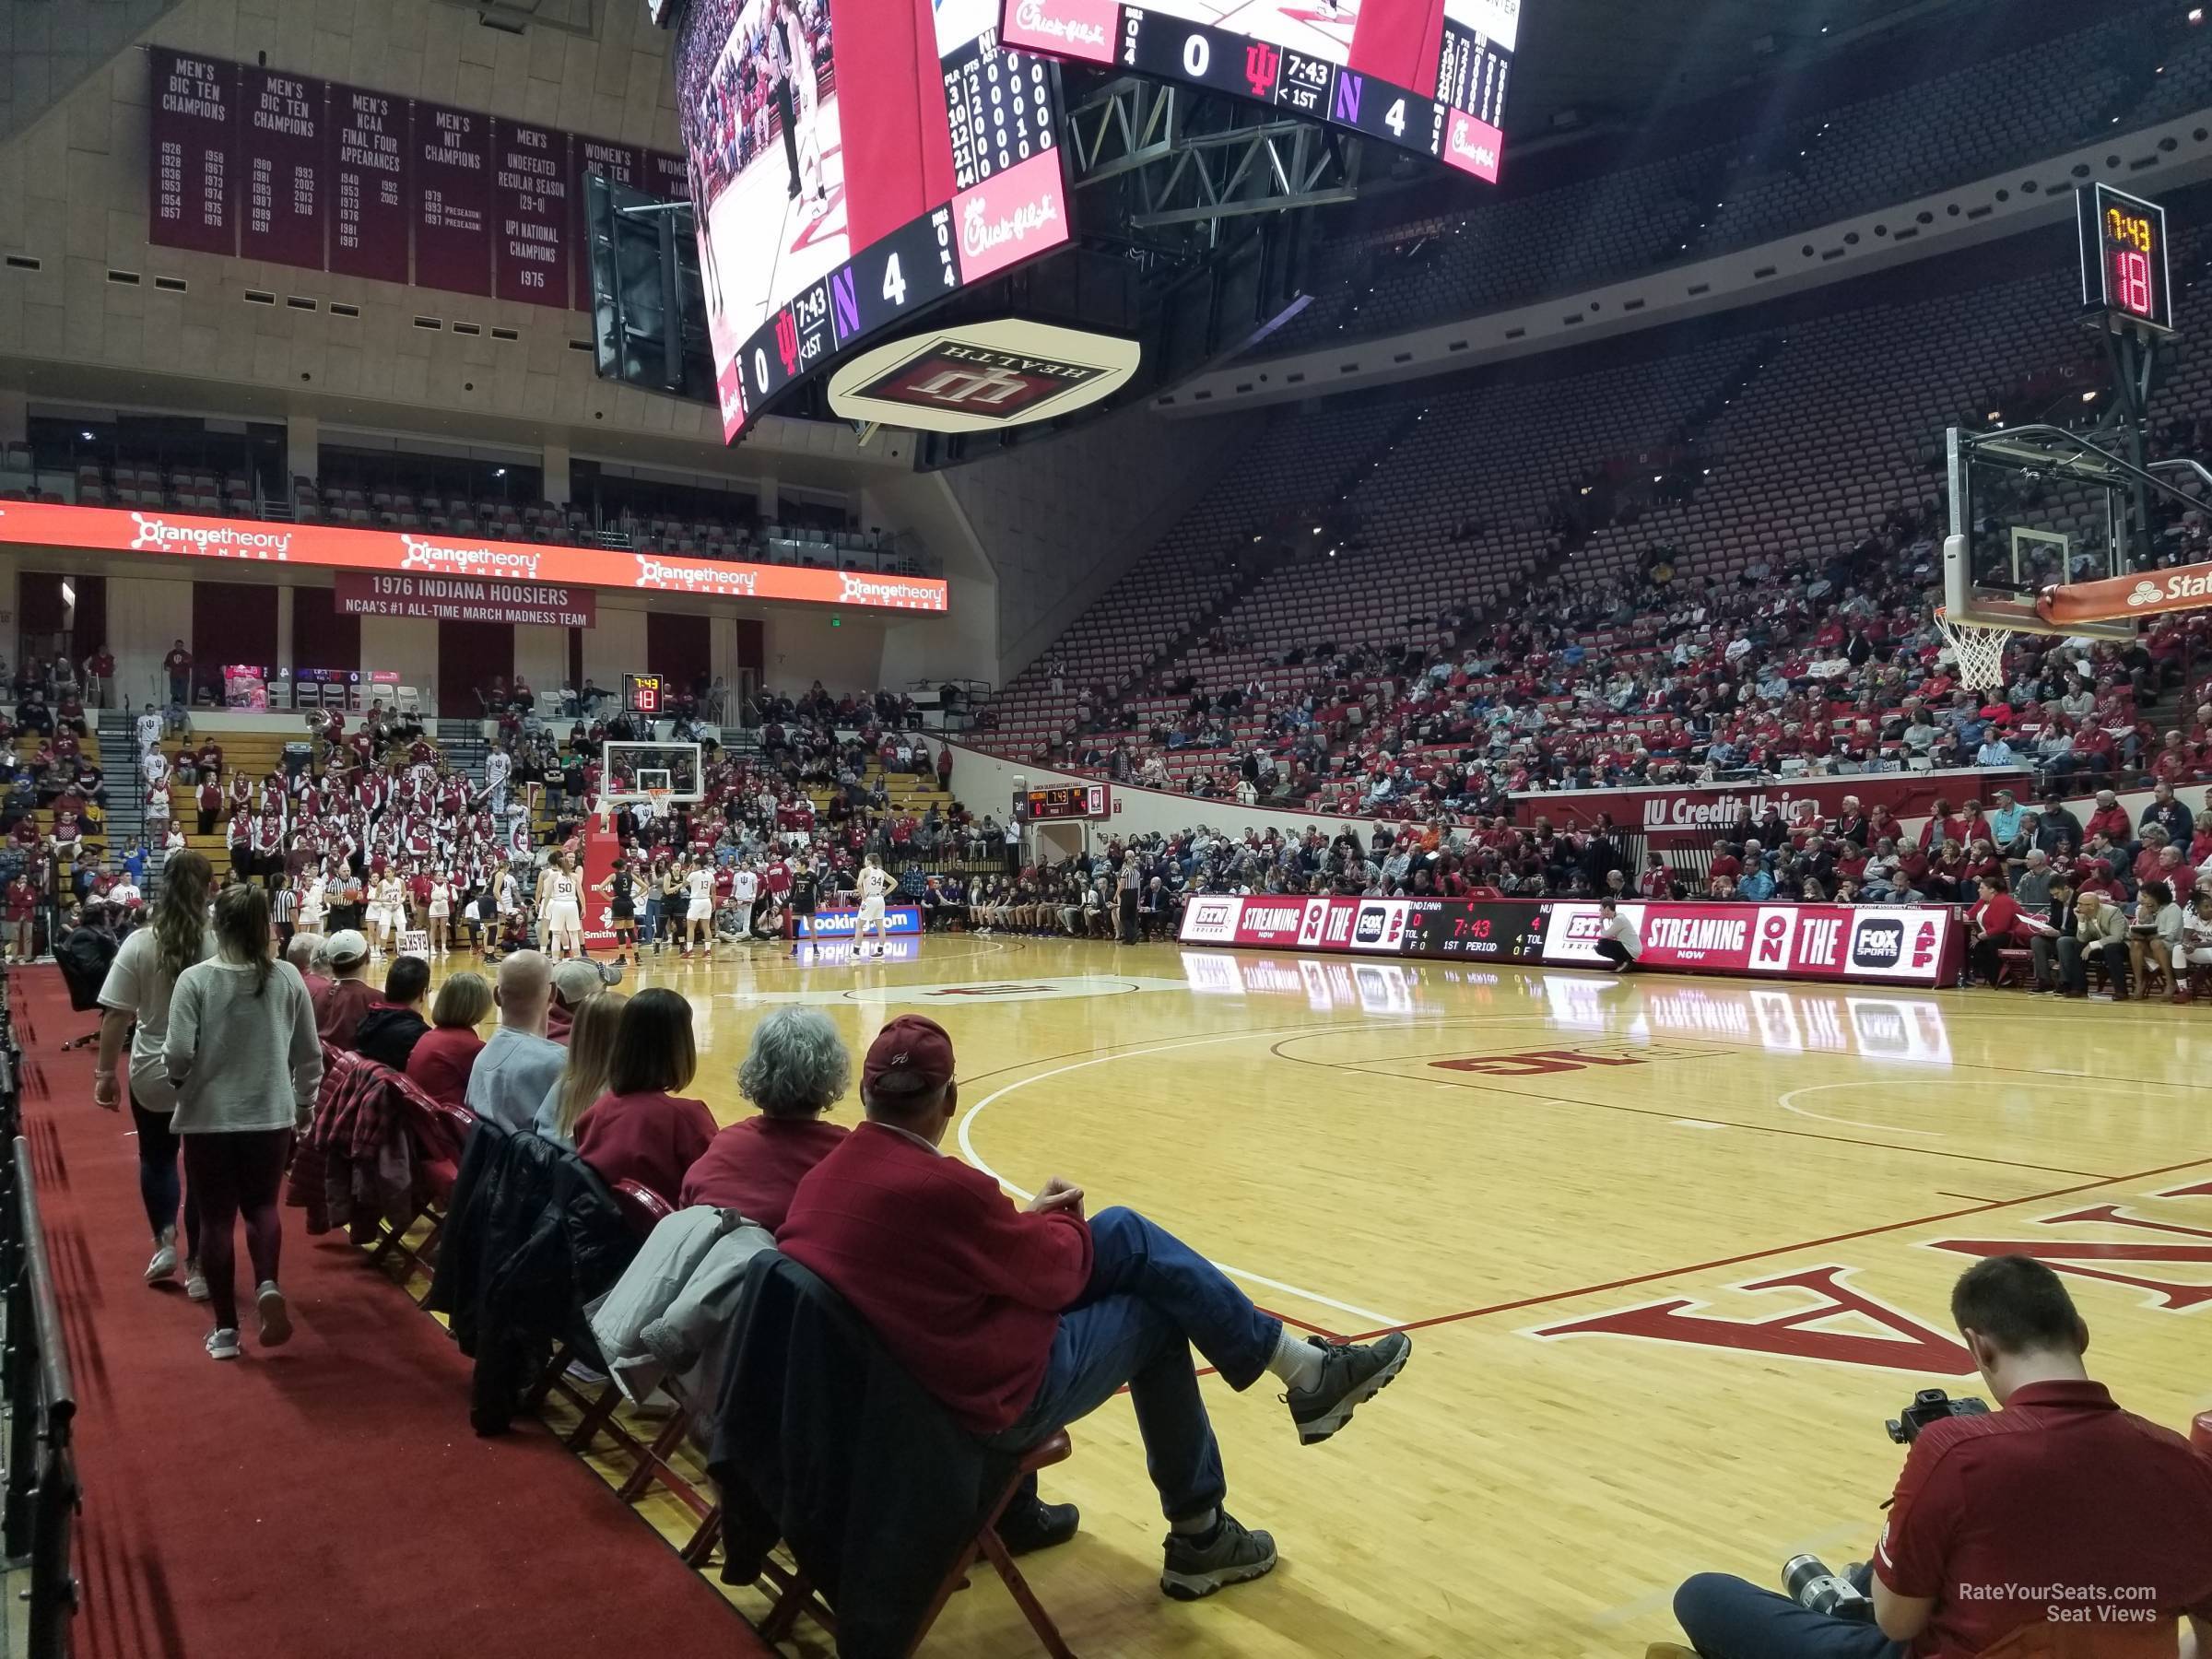 section 8, row 1 seat view  - assembly hall